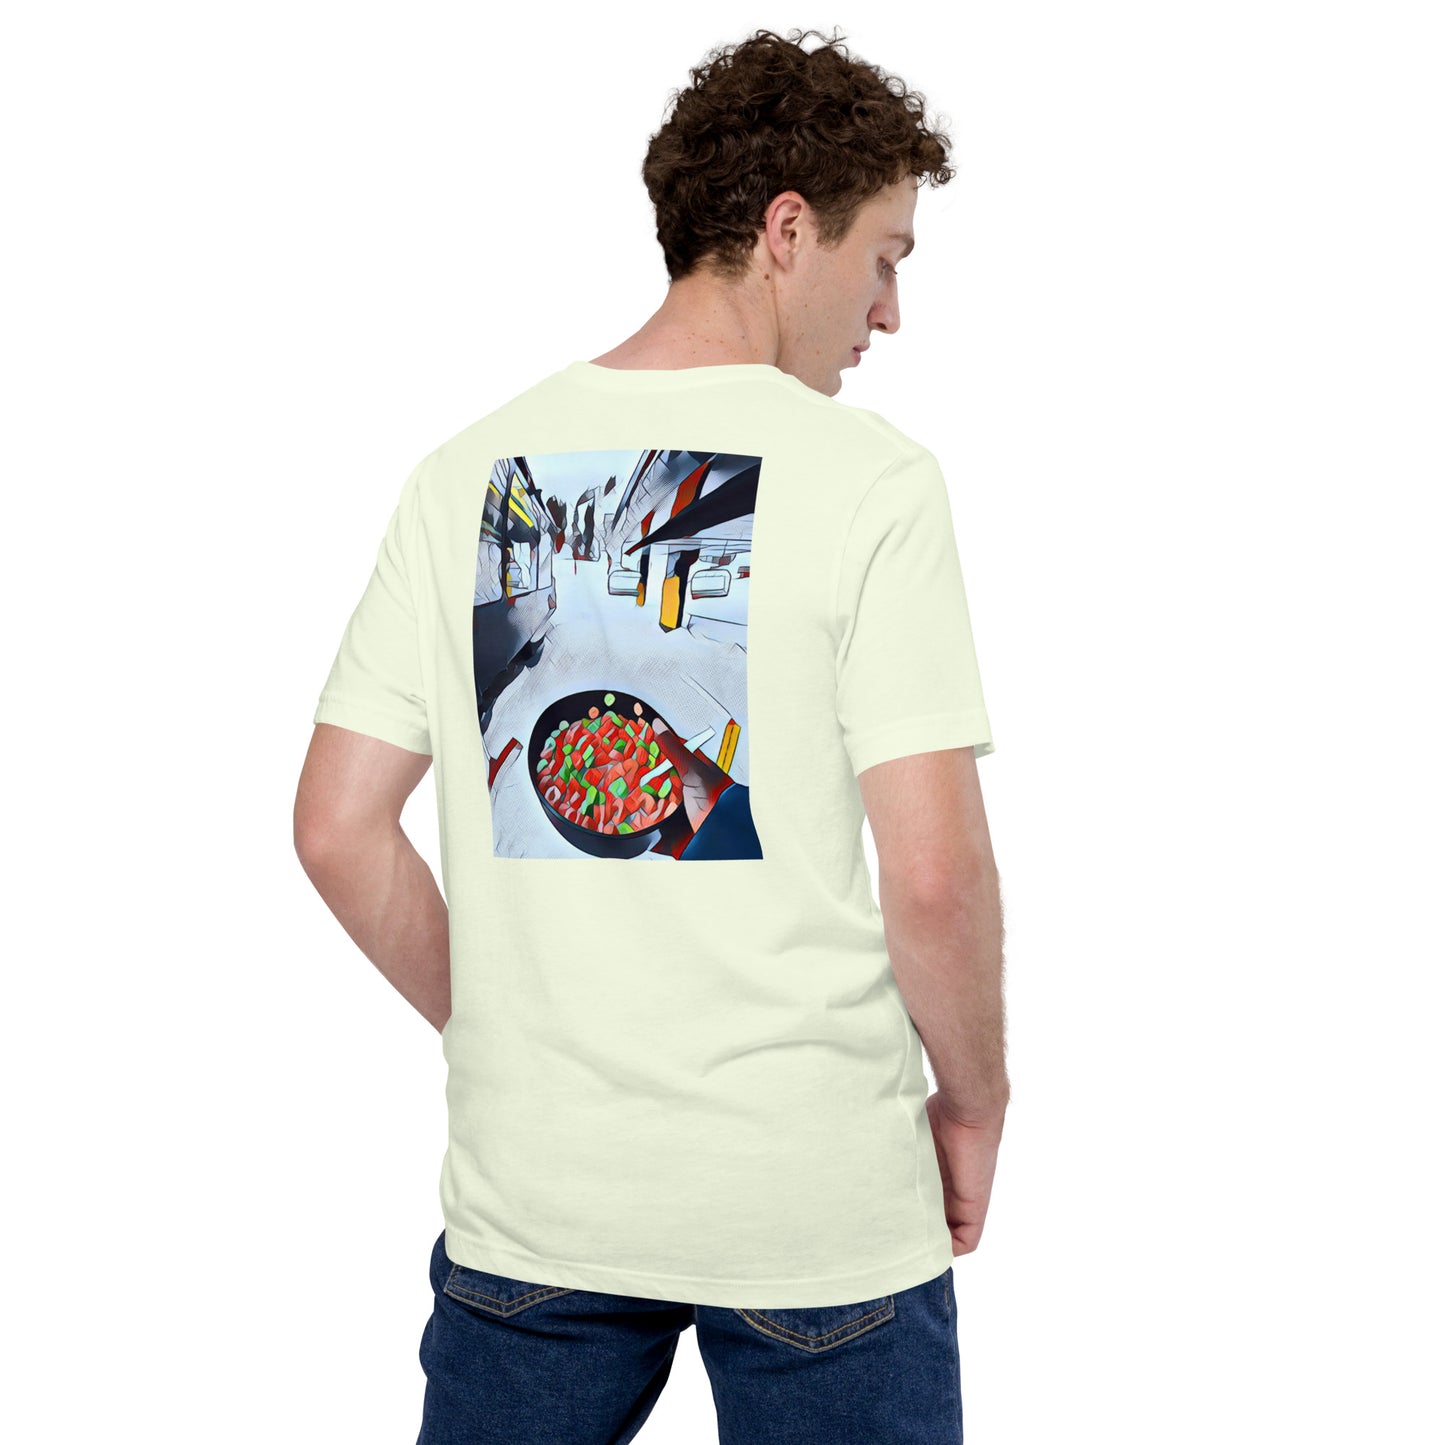 Sometimes the cereal is the brightest part of the day (t-shirt)